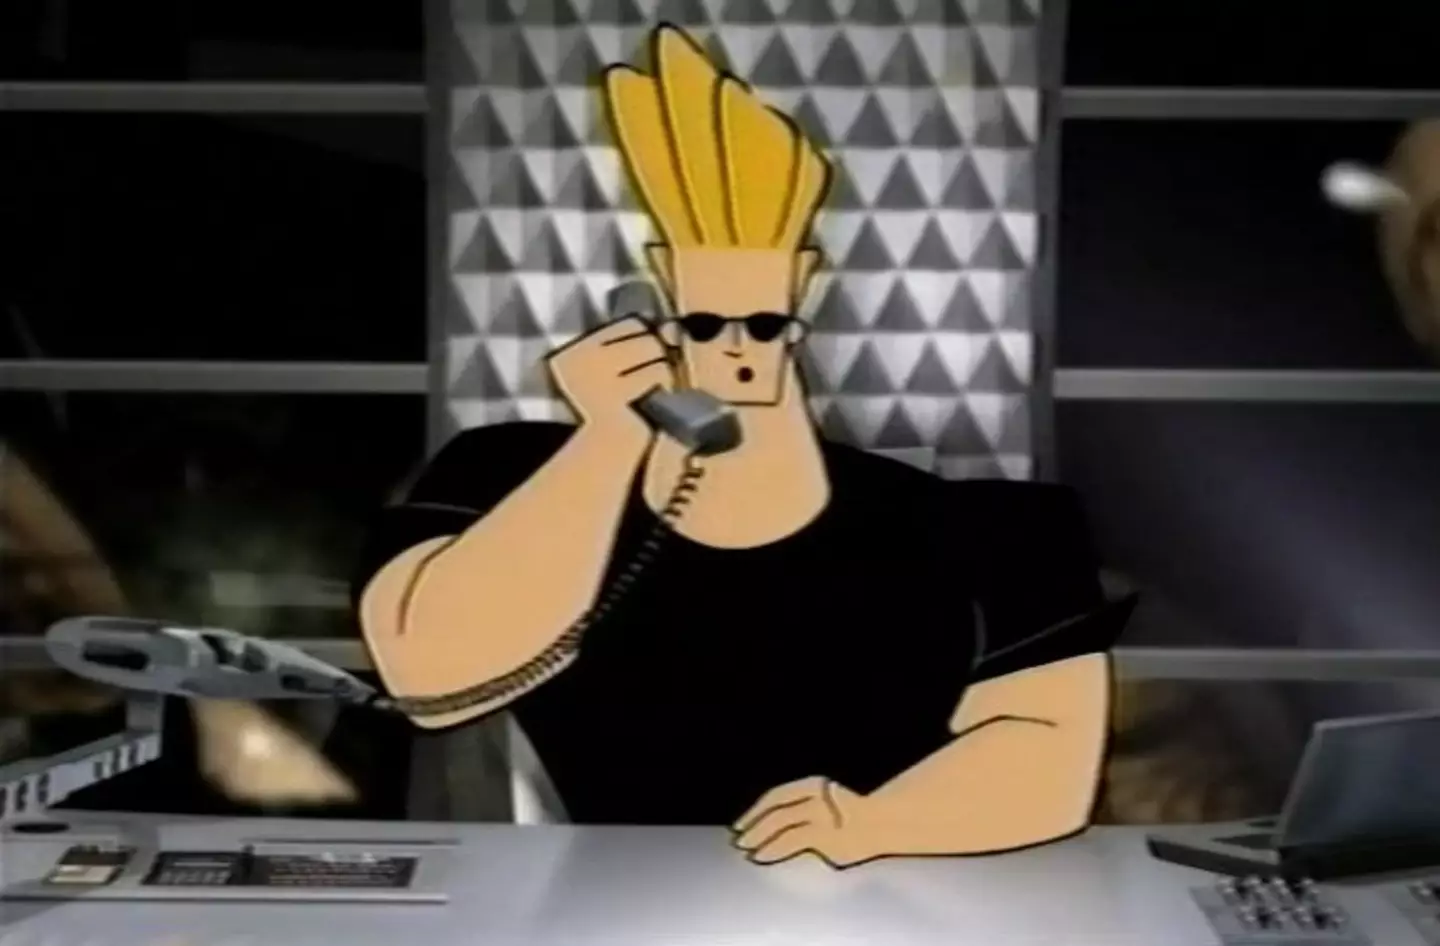 The Johnny Bravo crossover has recently been discovered.